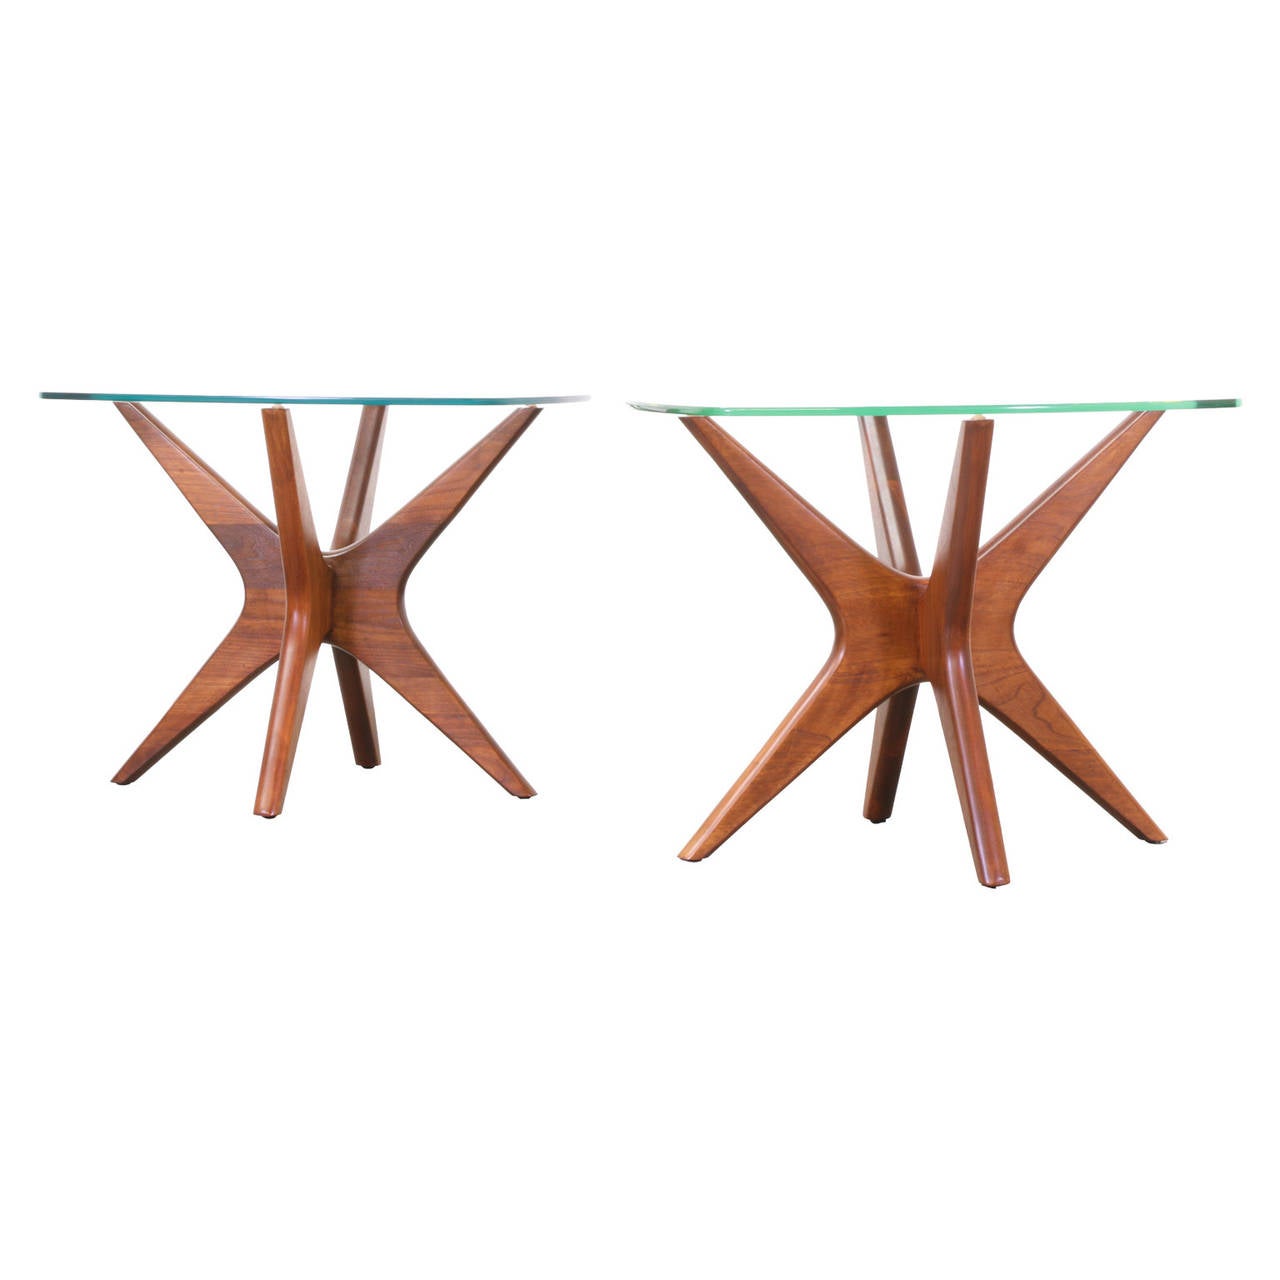 Designer: Adrian Pearsall
Manufacturer: Craft Associates
Period/Style: Mid Century Modern
Country: United States
Date: 1950’s

Dimensions: 19.25″H x 24″L x 20″W
Materials: Walnut, Glass
Condition: Excellent – Newly Refinished
Number of